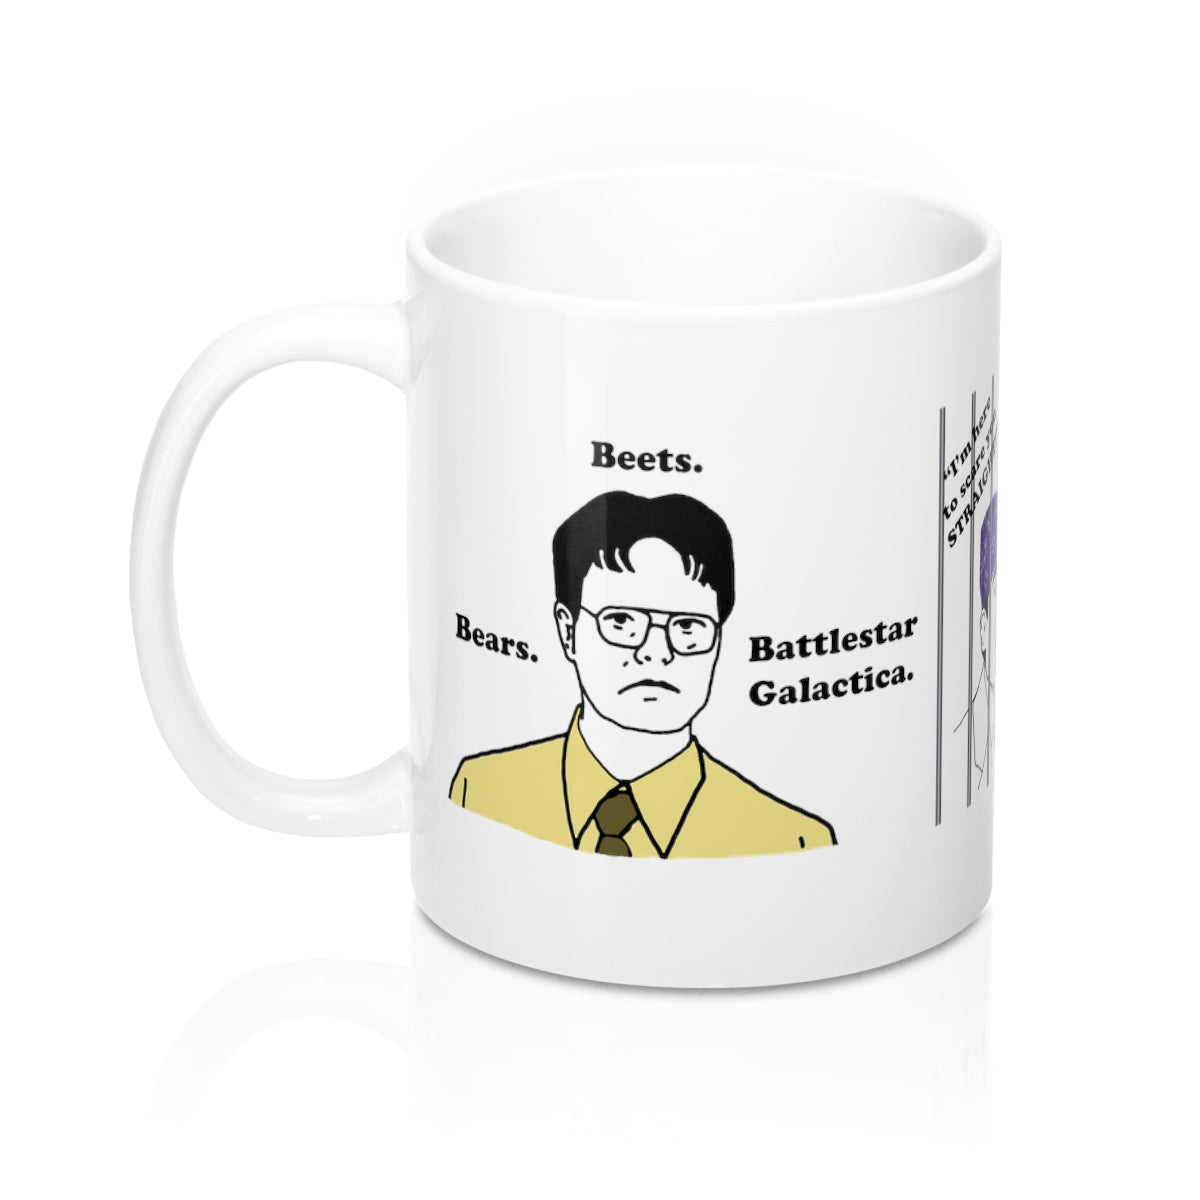 Michael Scott Mug and Paper Company Mug and Coaster Set of 4: The People Person's Paper People, Prison Mike, Dwight, Jim,Fun Run Race